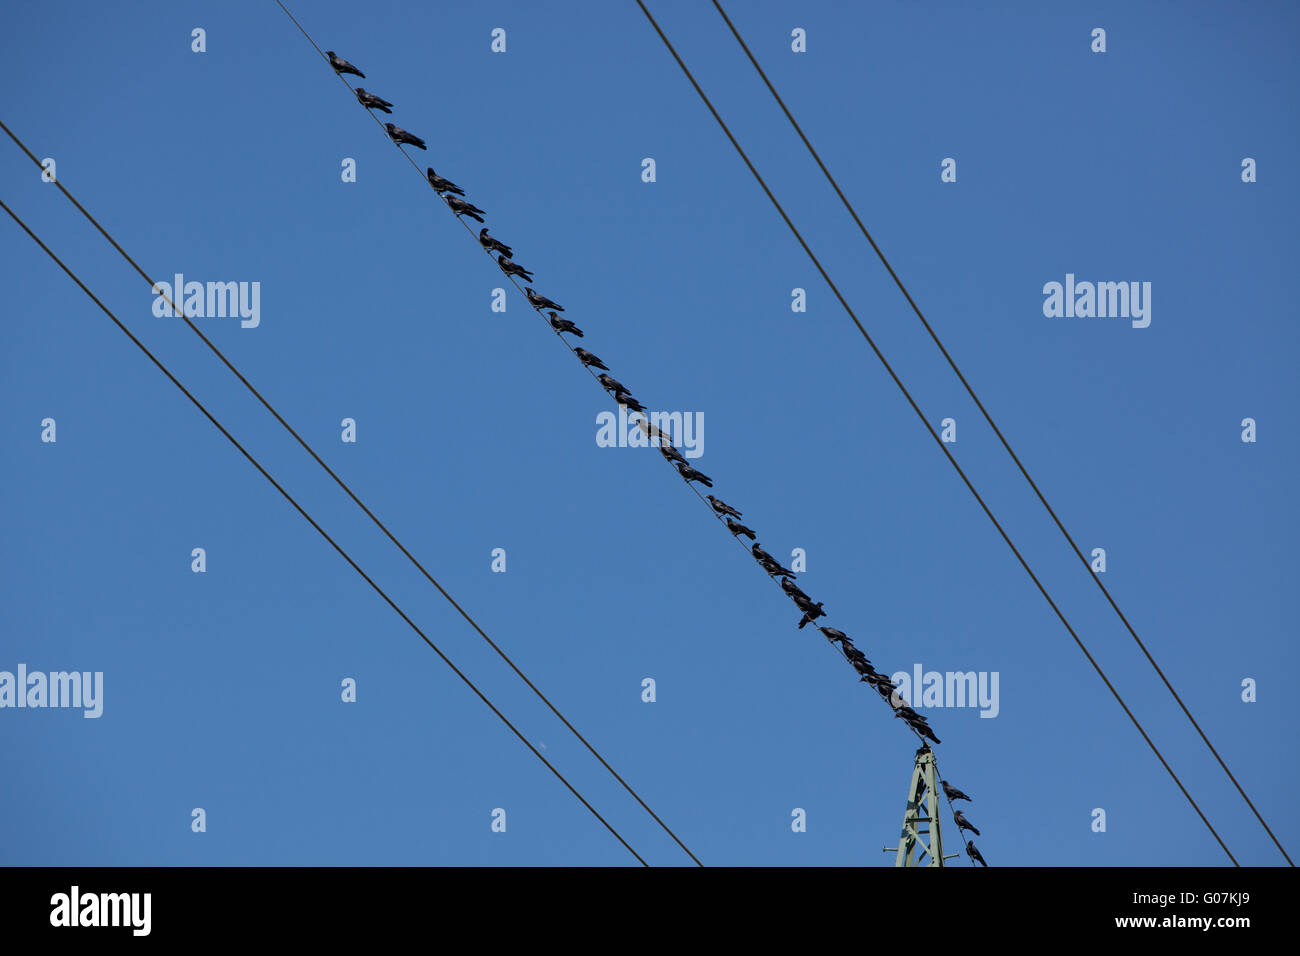 Ravens, sitting on a high voltage power line Stock Photo